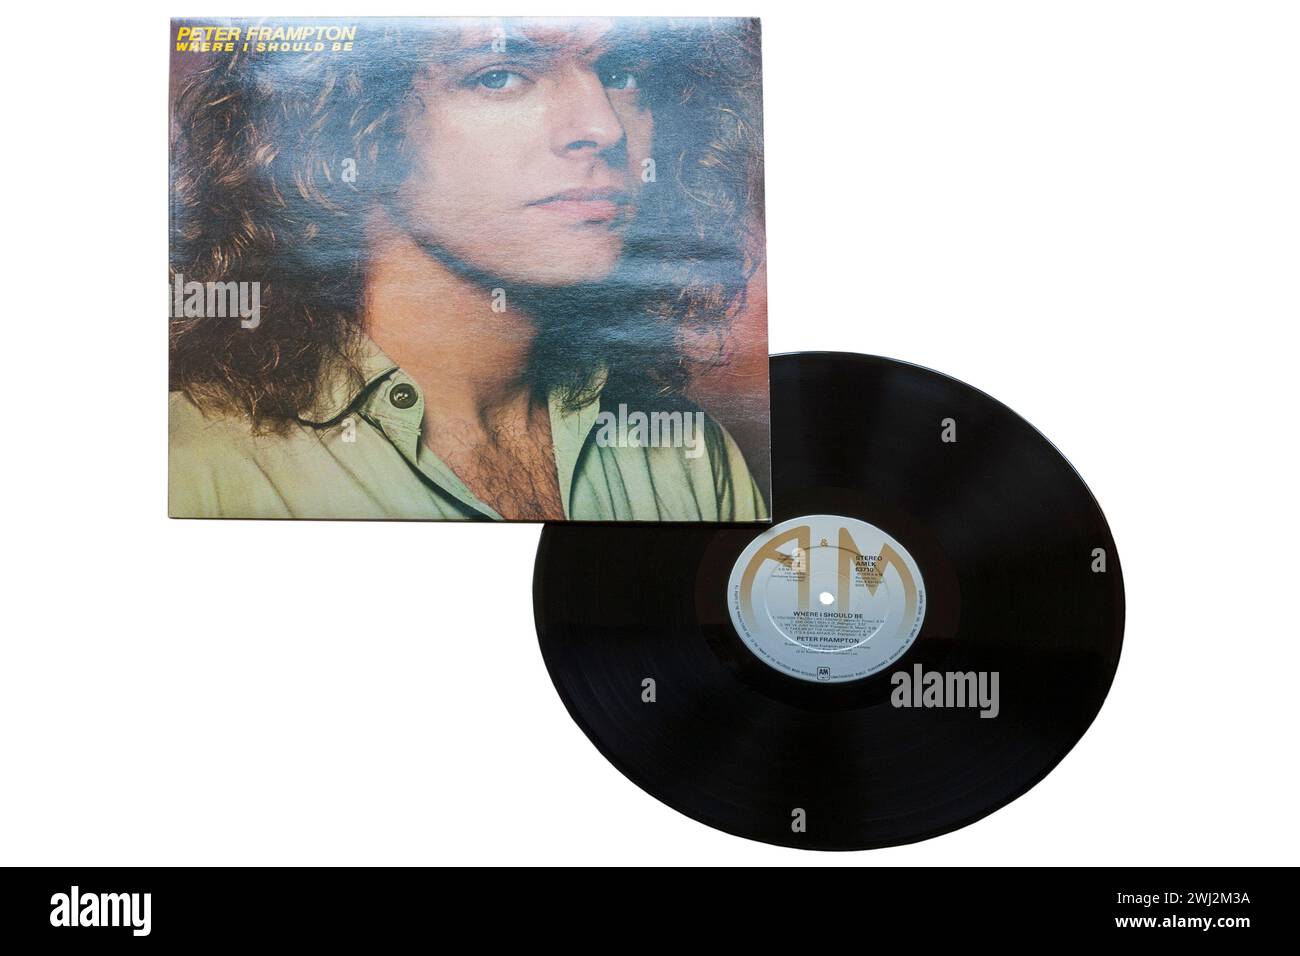 Peter Frampton Where I Should Be vinyl record album LP cover isolated on white background - 1979 Stock Photo